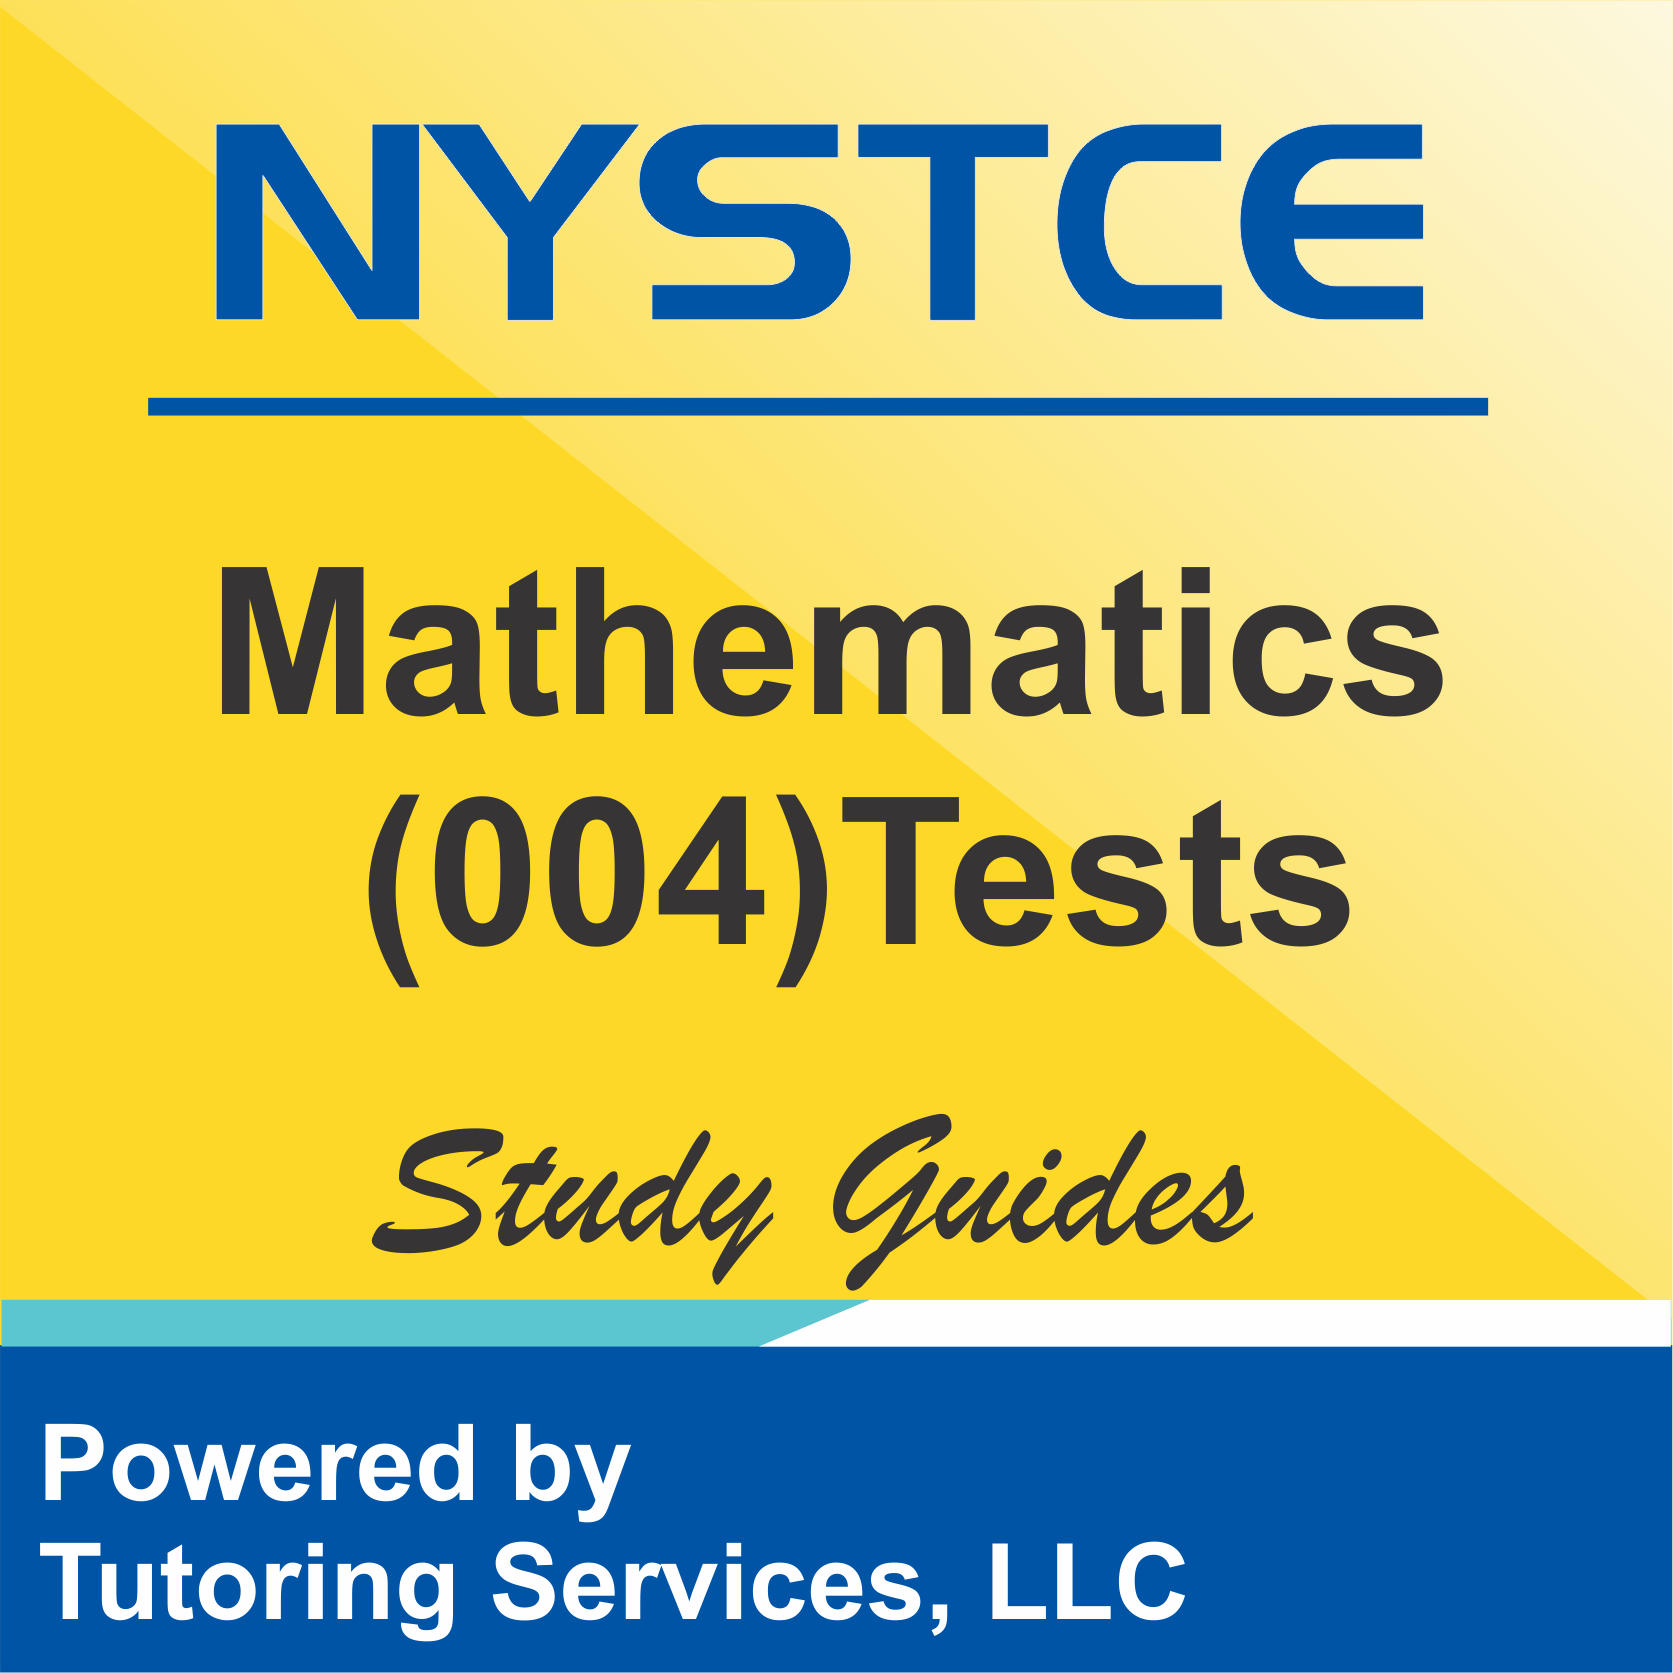 NYSTCE New York State Teaching Examination Certification for Mathematics (004) 